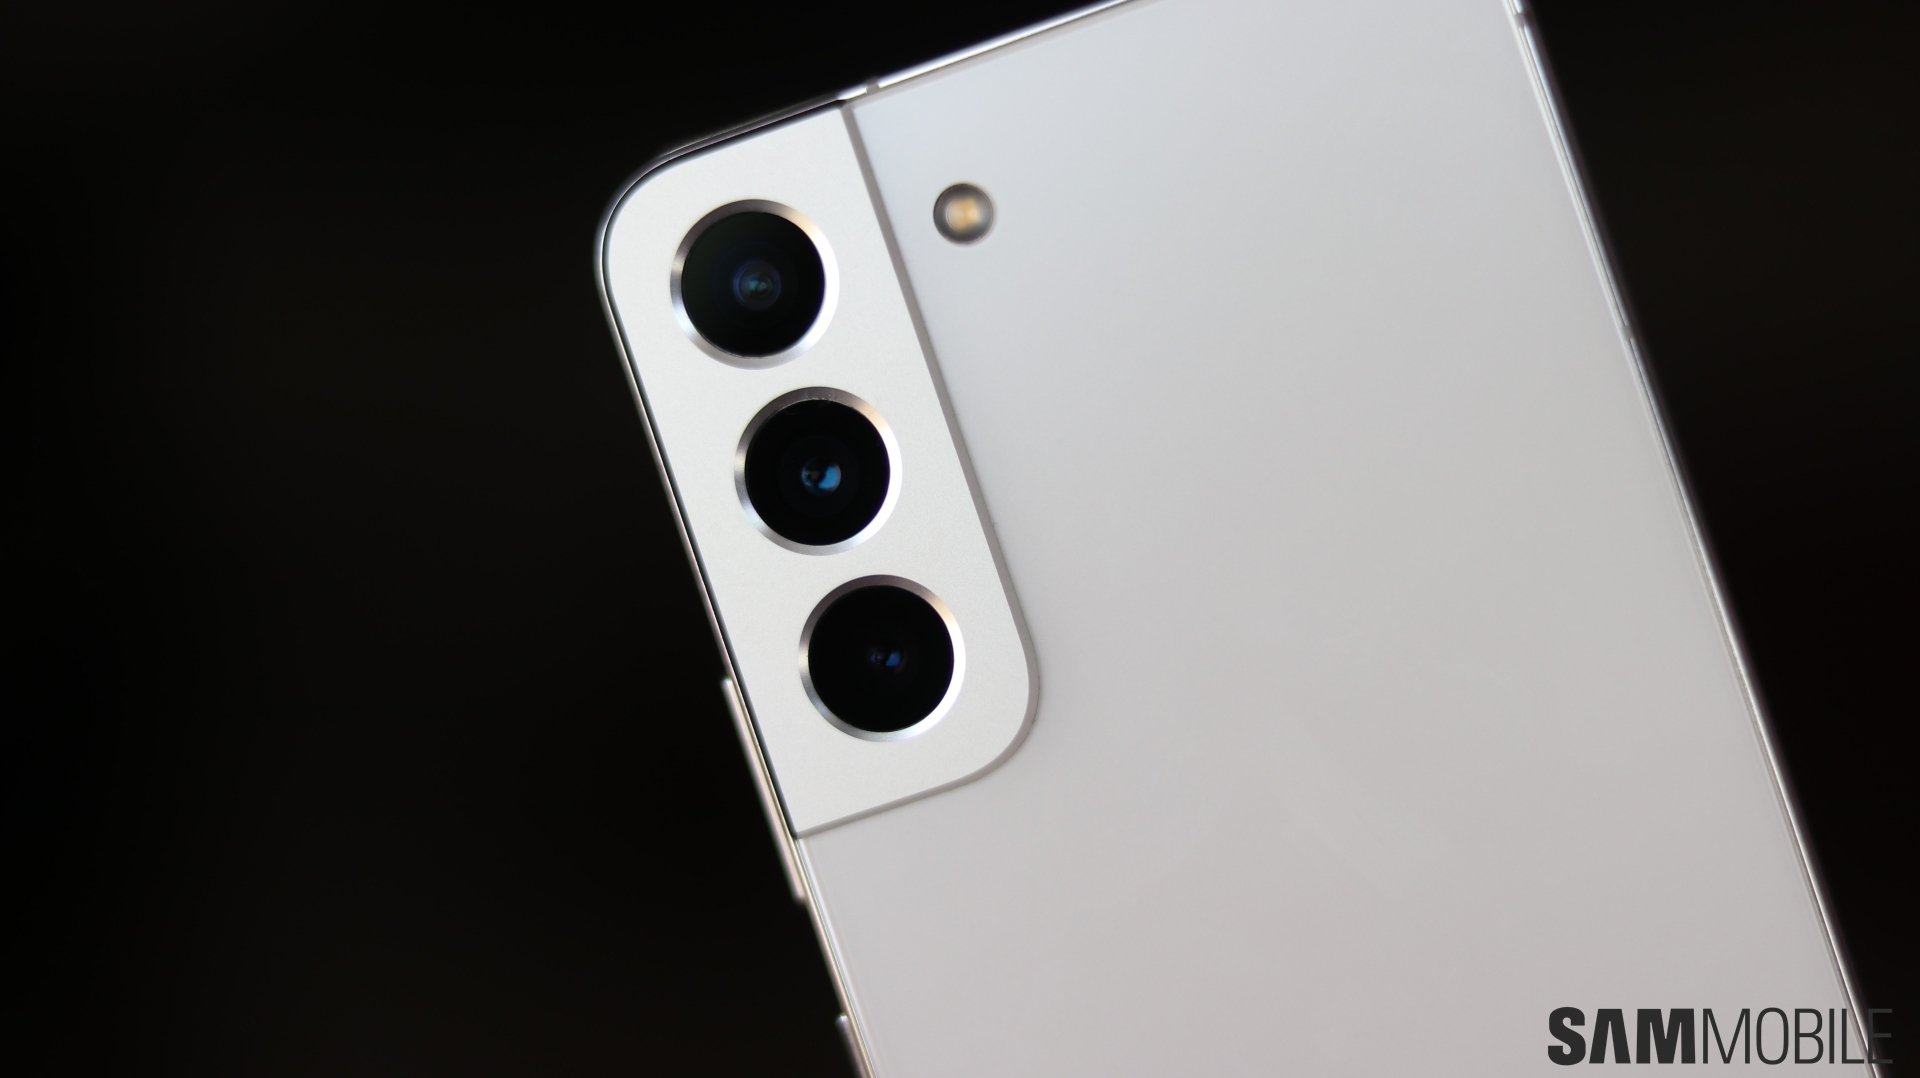 More Camera and Gallery features are coming to older Galaxy phones